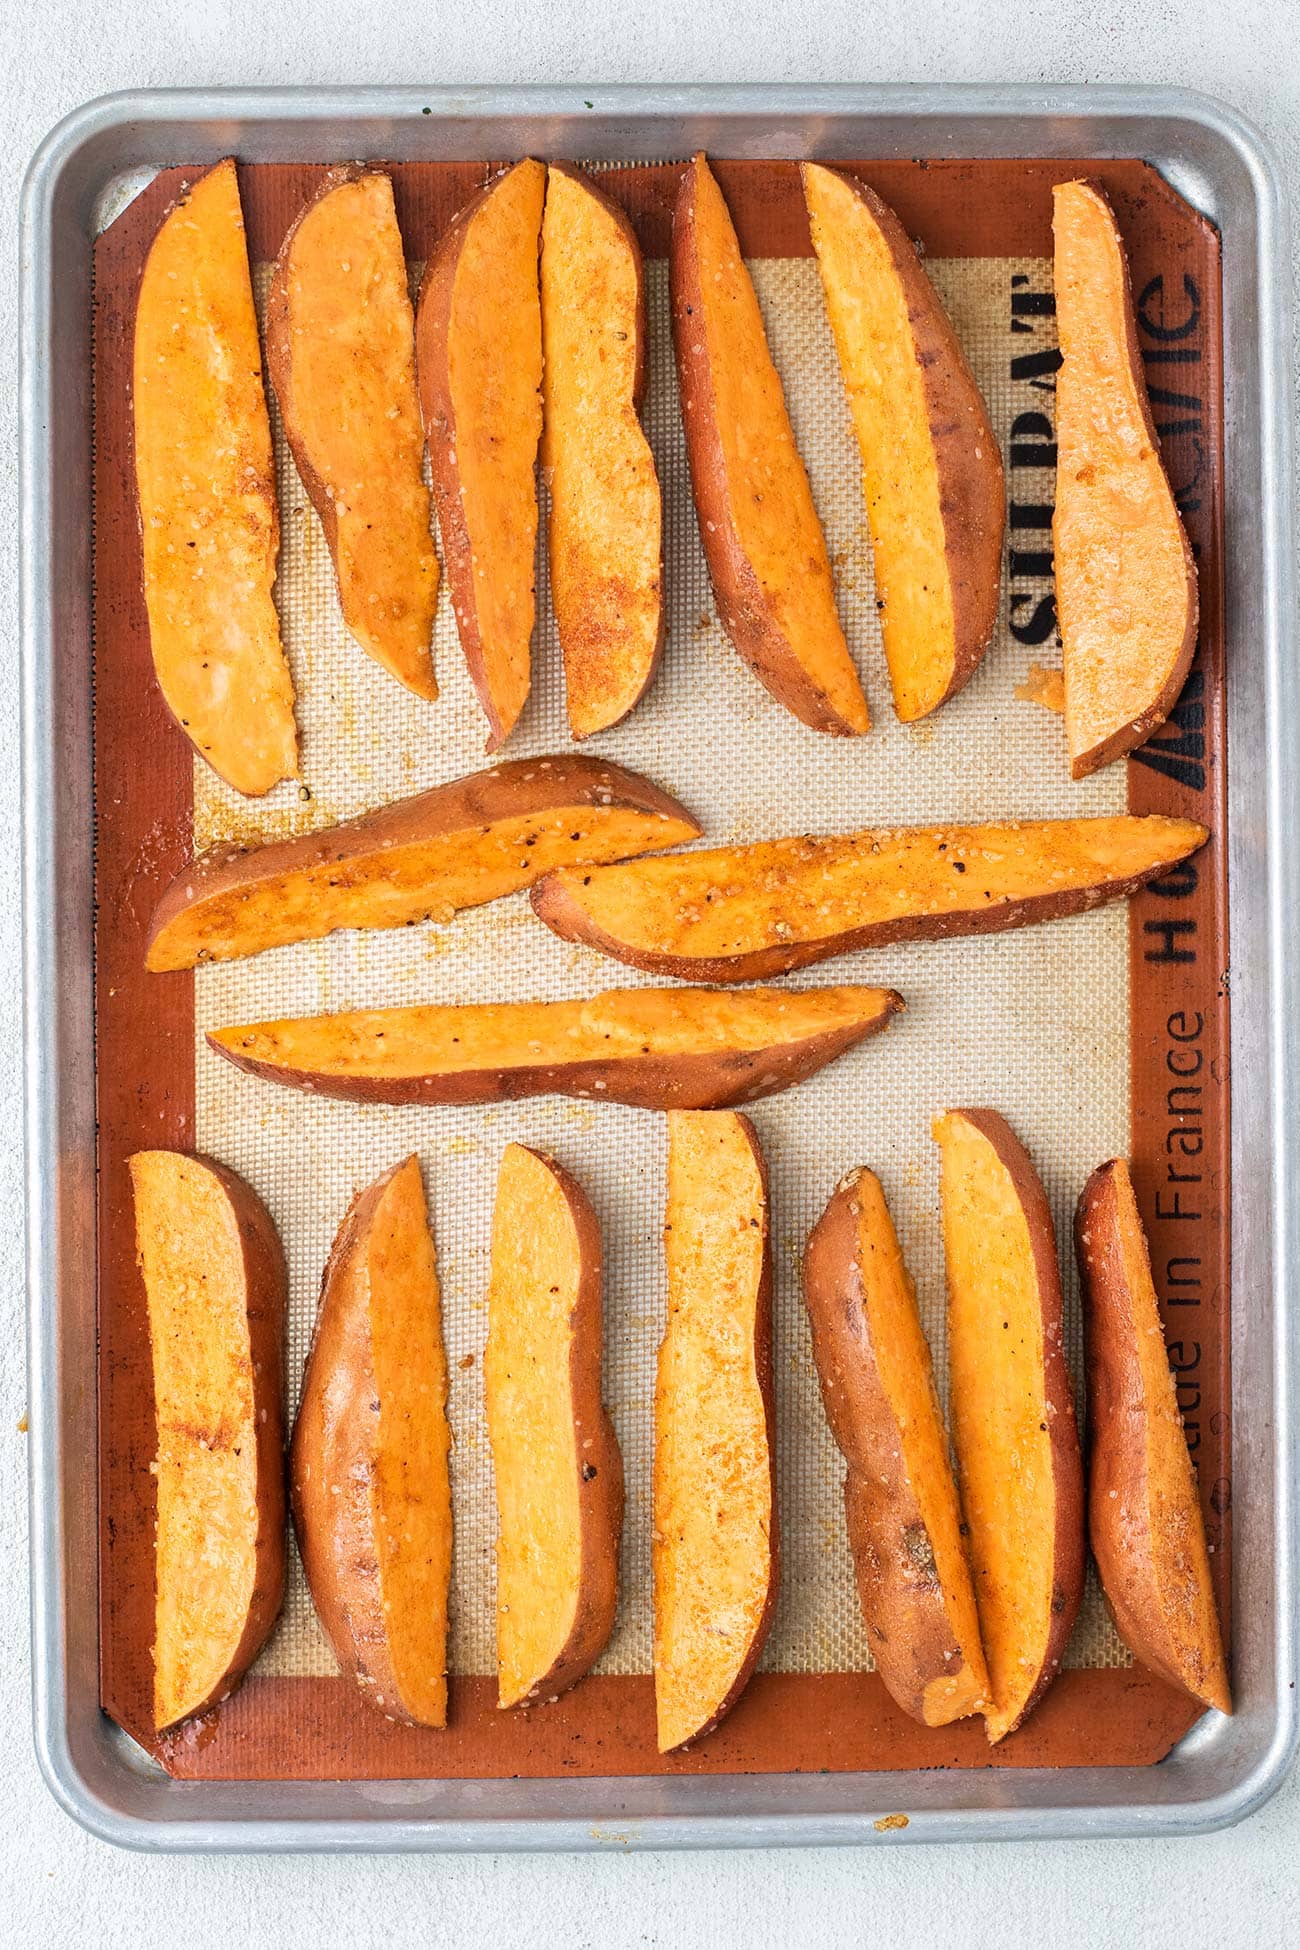 Showing how to add sweet potatoes to a baking tray with space around each one to crisp.